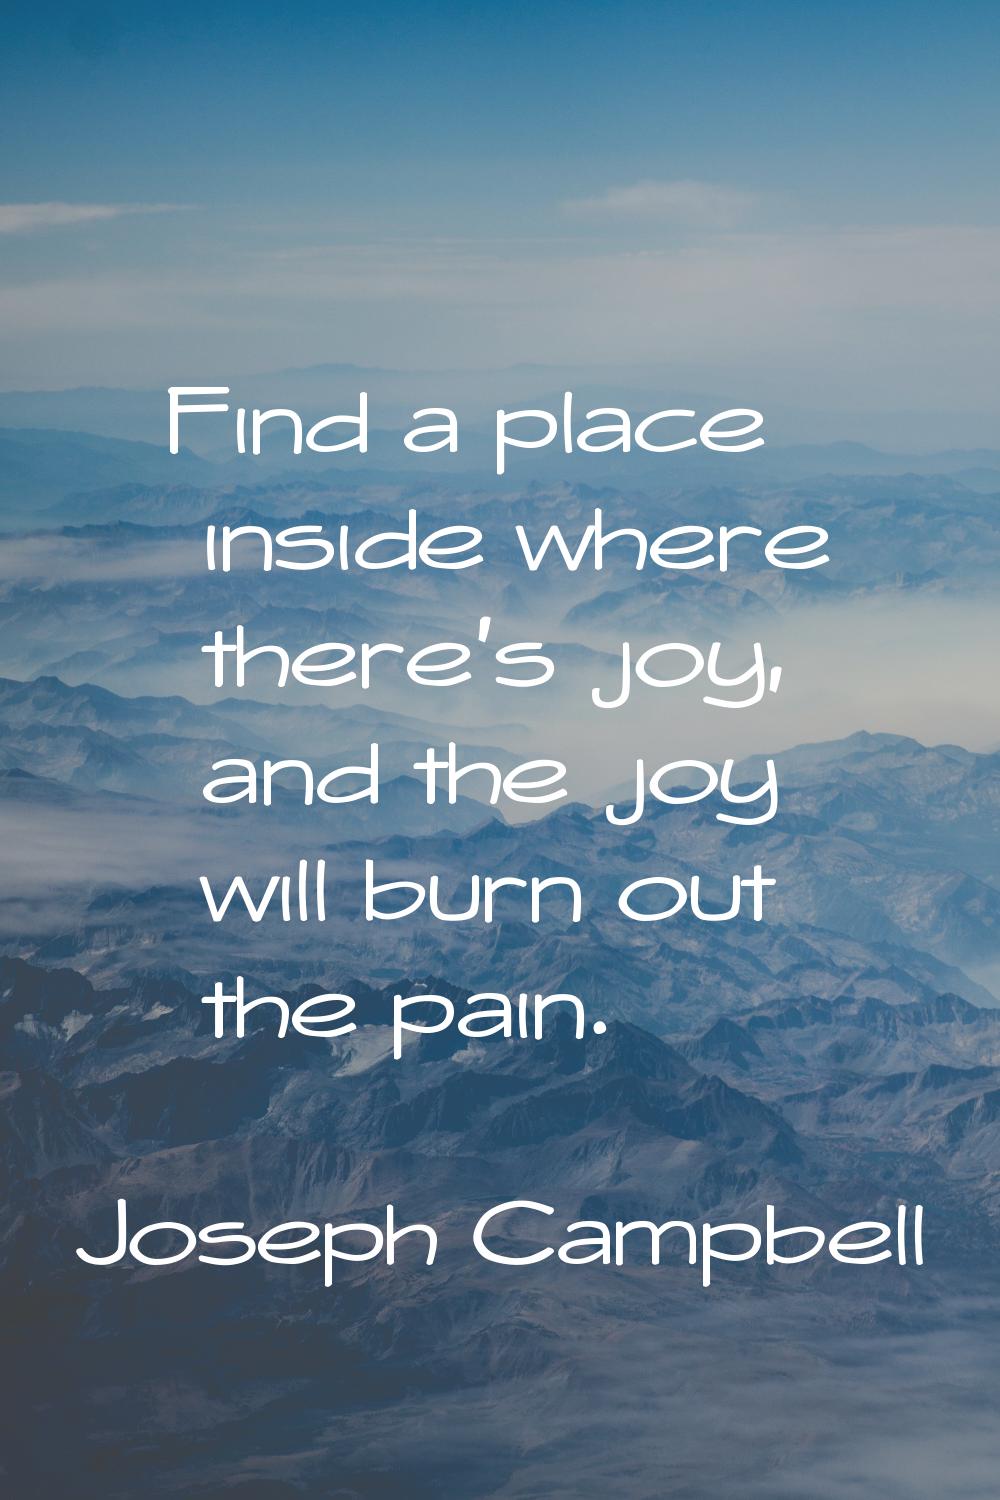 Find a place inside where there's joy, and the joy will burn out the pain.